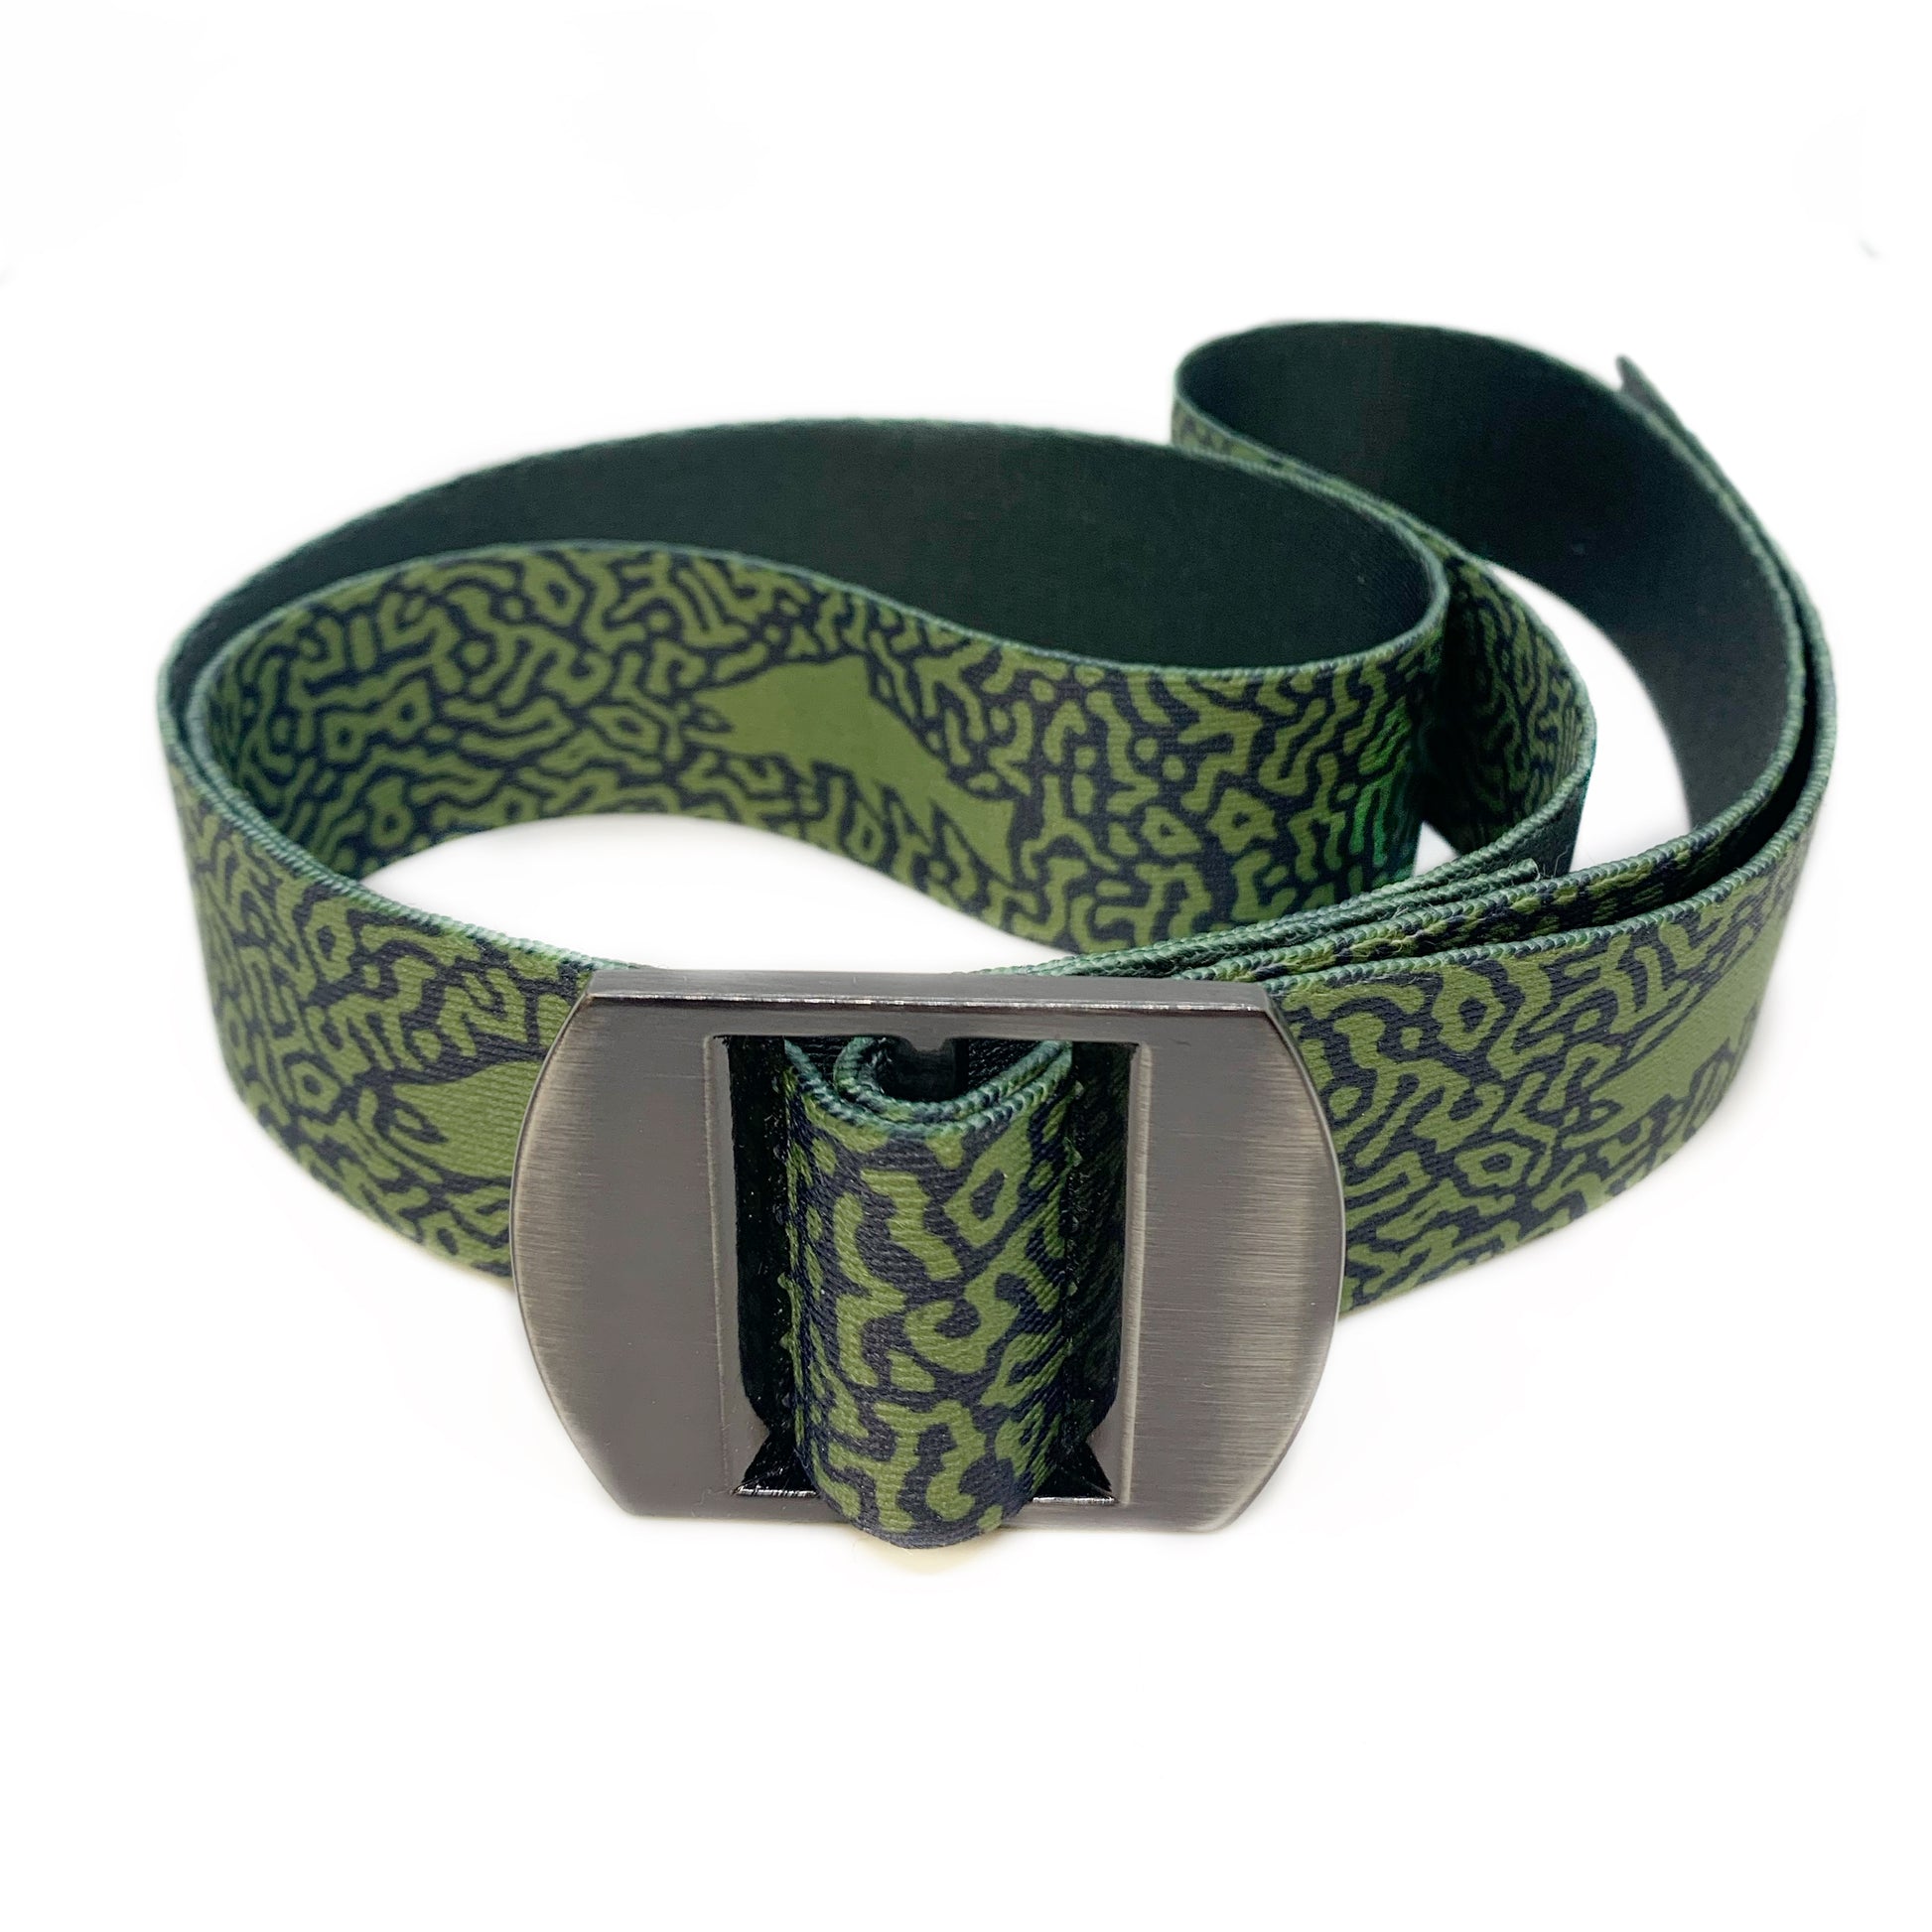 A nylon belt with a metal front buckle has brook trout print and trout on it.